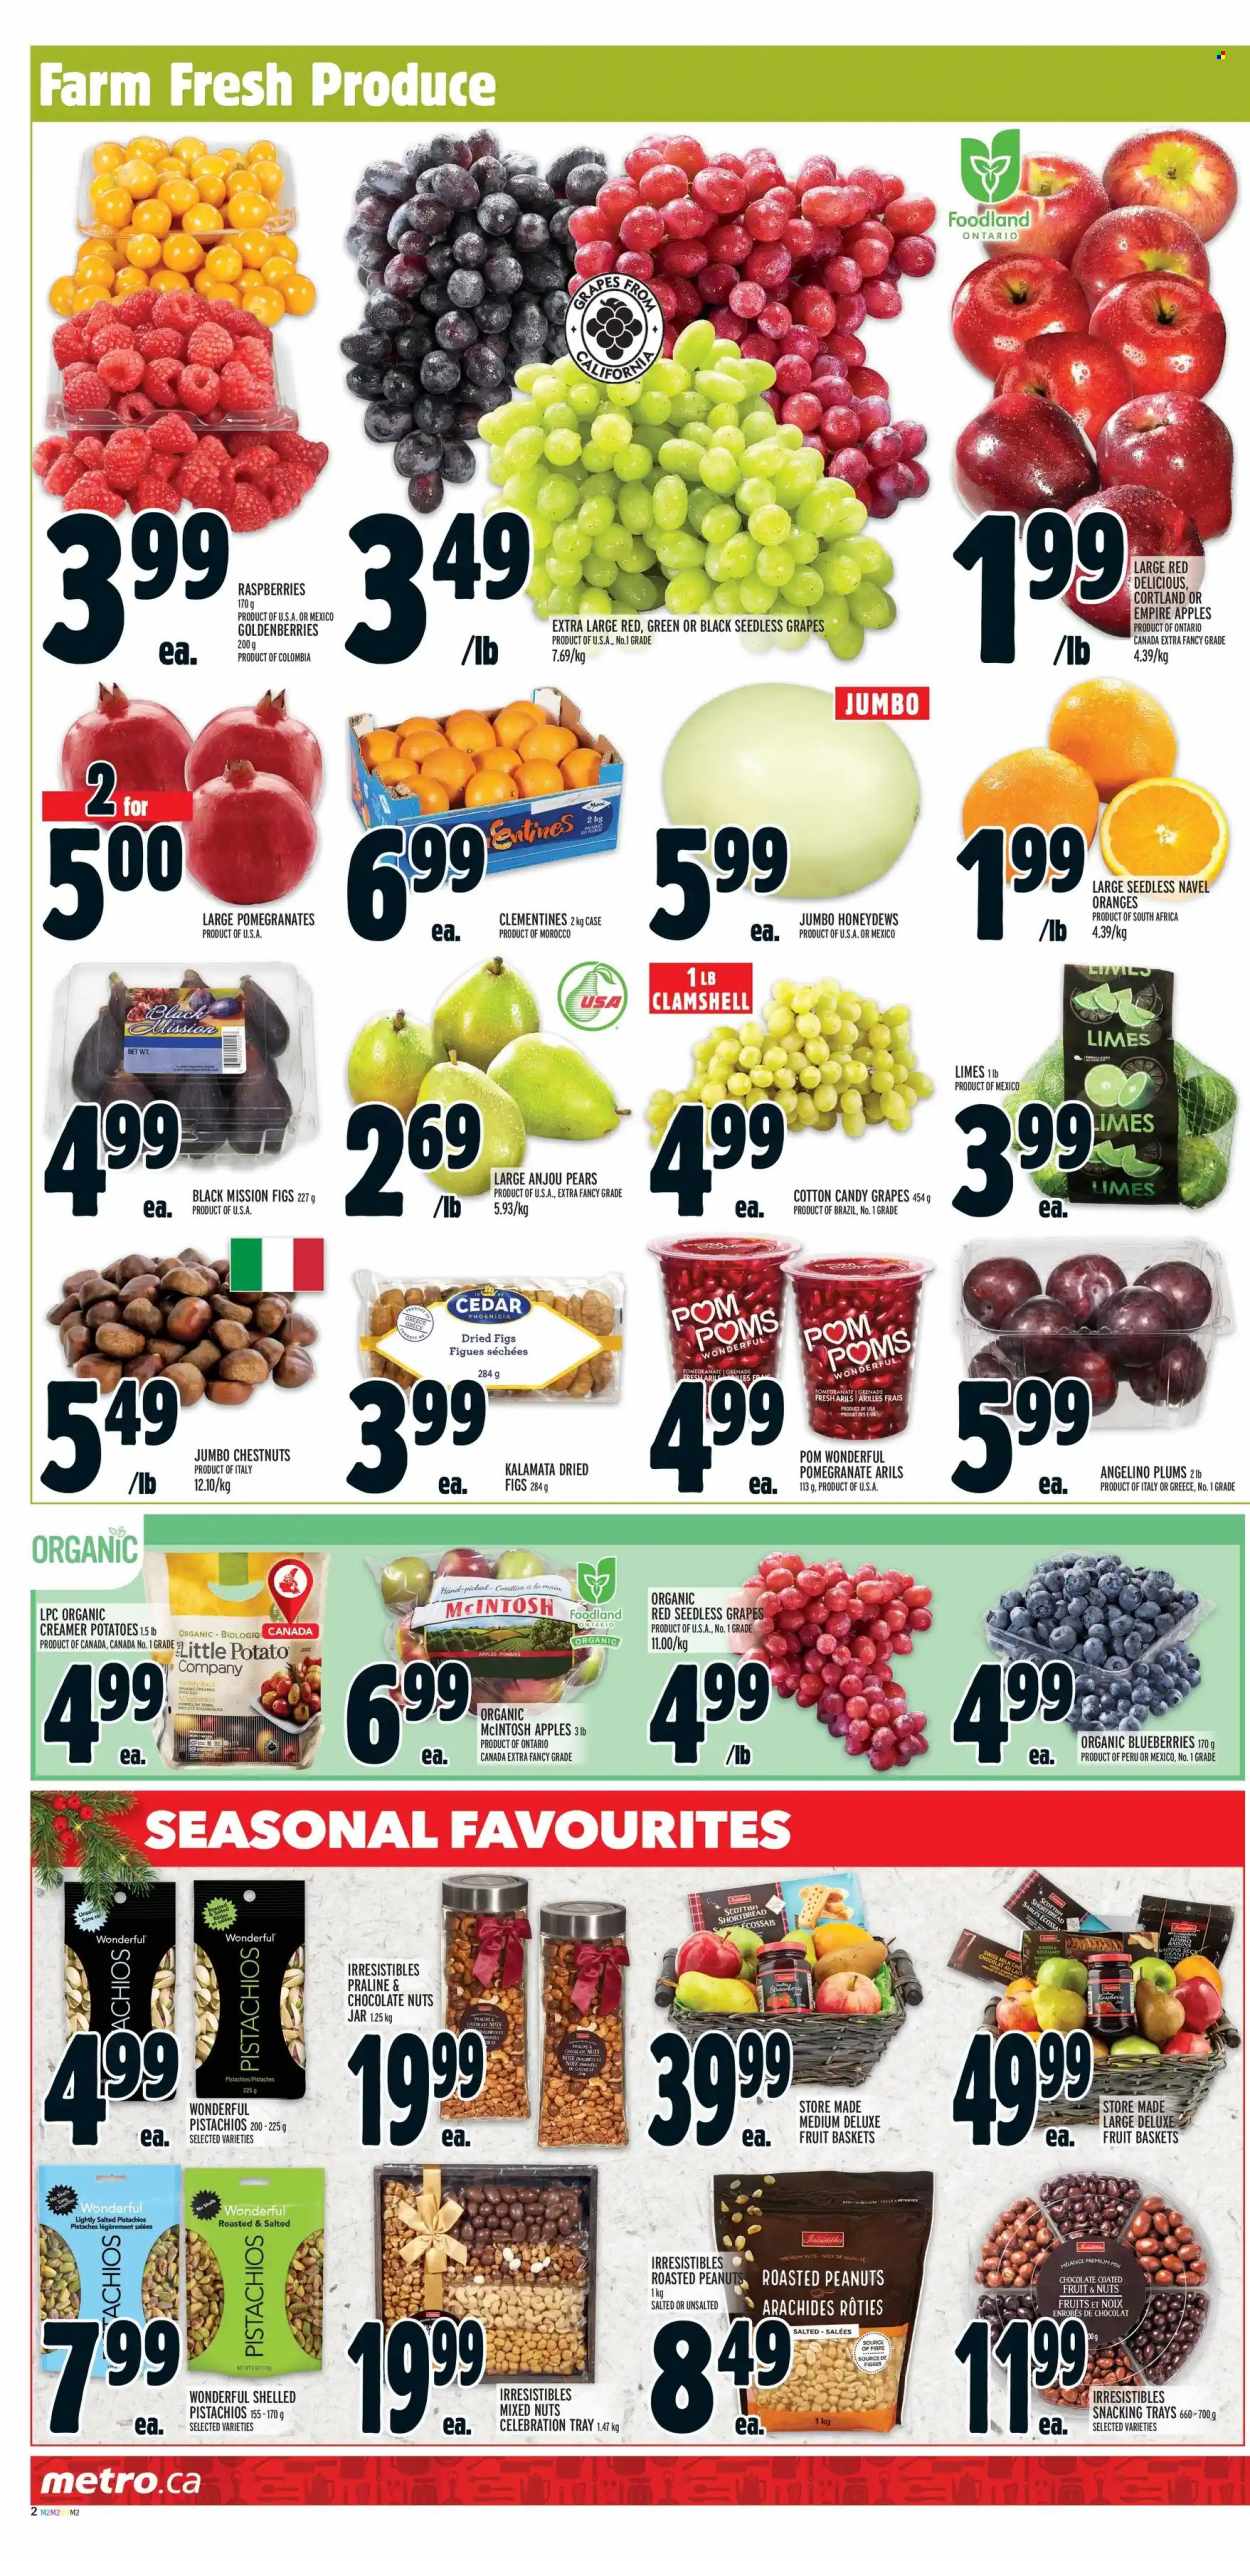 thumbnail - Metro Flyer - November 24, 2022 - November 30, 2022 - Sales products - potatoes, apples, blueberries, clementines, figs, grapes, limes, Red Delicious apples, seedless grapes, plums, pears, oranges, pomegranate, navel oranges, chocolate, Celebration, cotton candy, roasted peanuts, chestnuts, peanuts, dried fruit, pistachios, dried figs, mixed nuts, basket, tray, jar, raisins. Page 2.